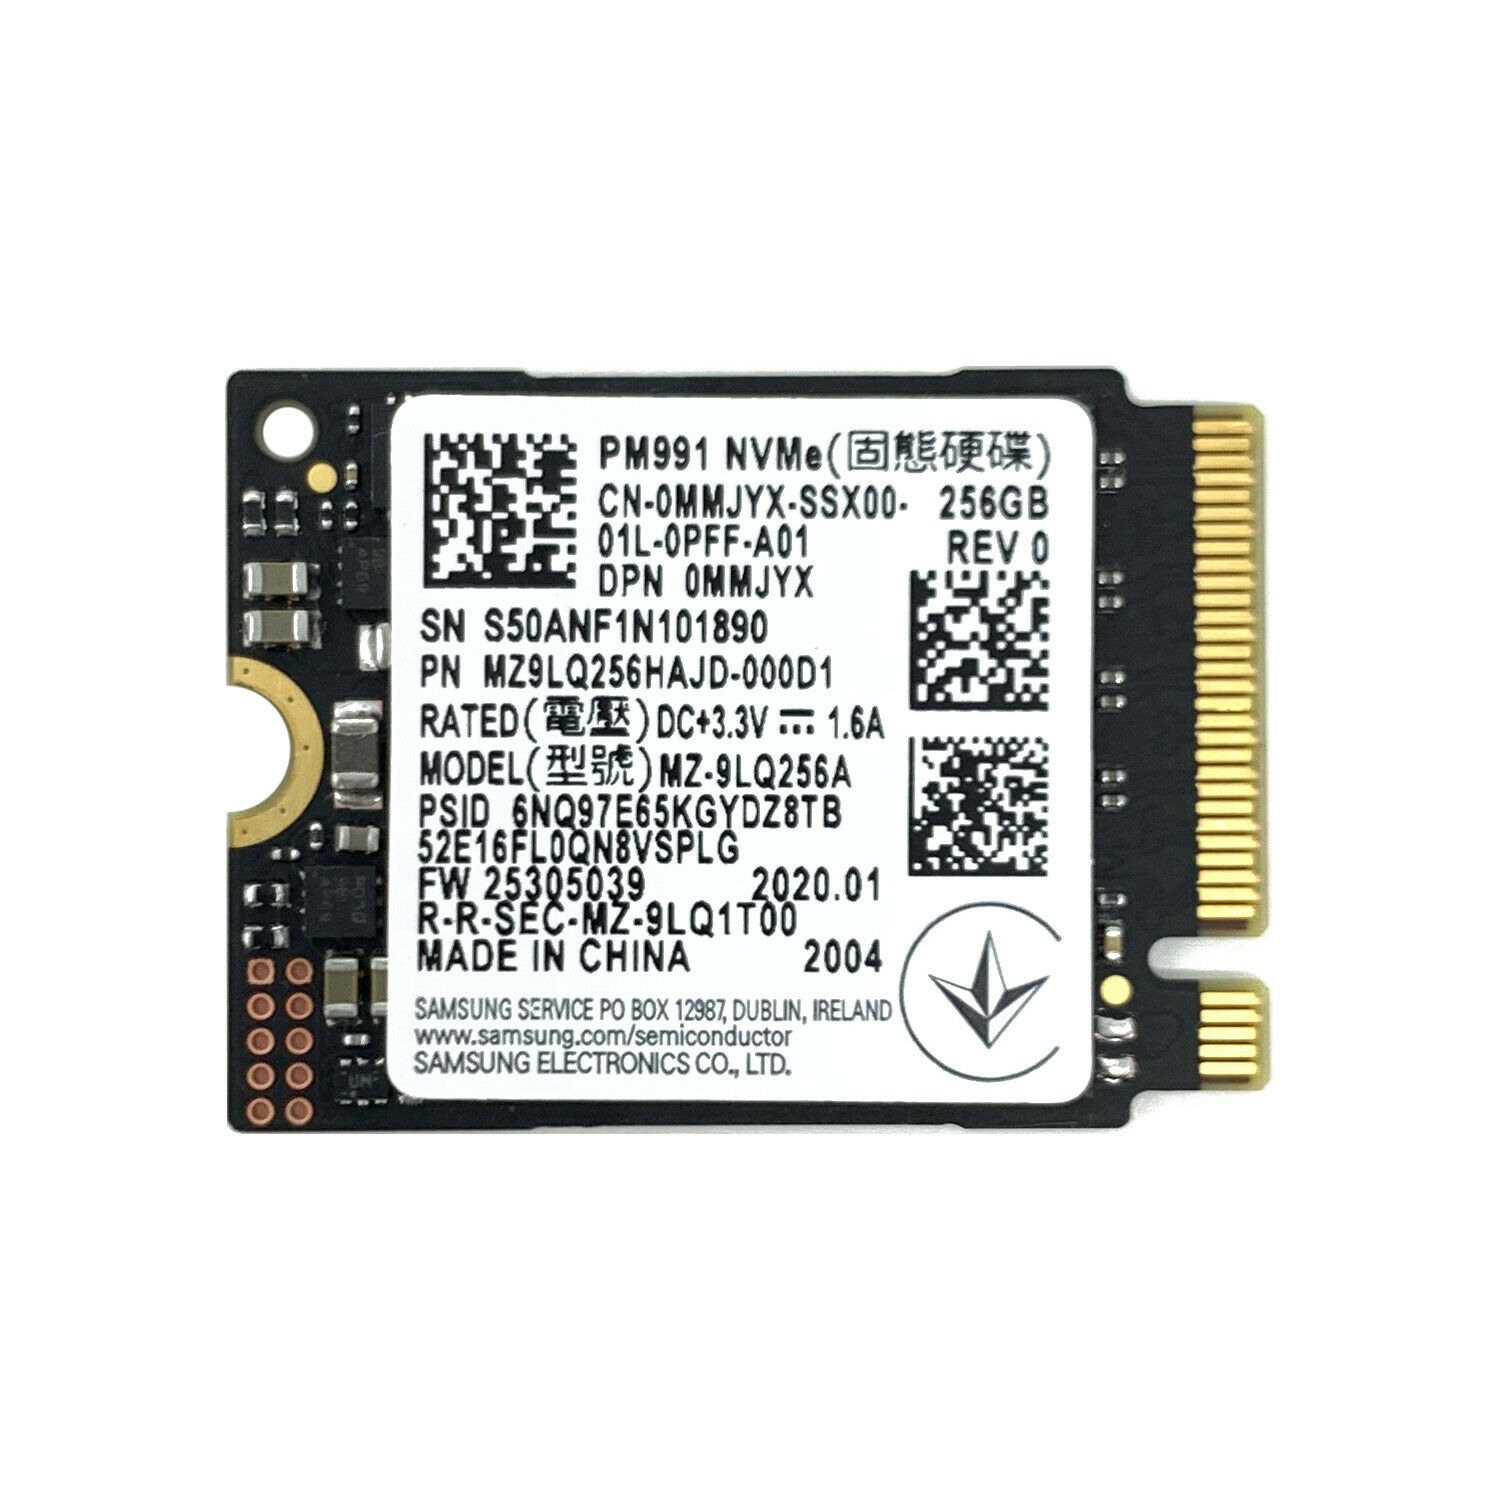 Samsung PM991 Internal 256GB PCIe Gen3 x4 NVMe Solid State Drive, M.2 2230 M Speeds up to 2000 MB/s read and 1000 MB/s write, OEM Package Internal SSDs Newegg.com